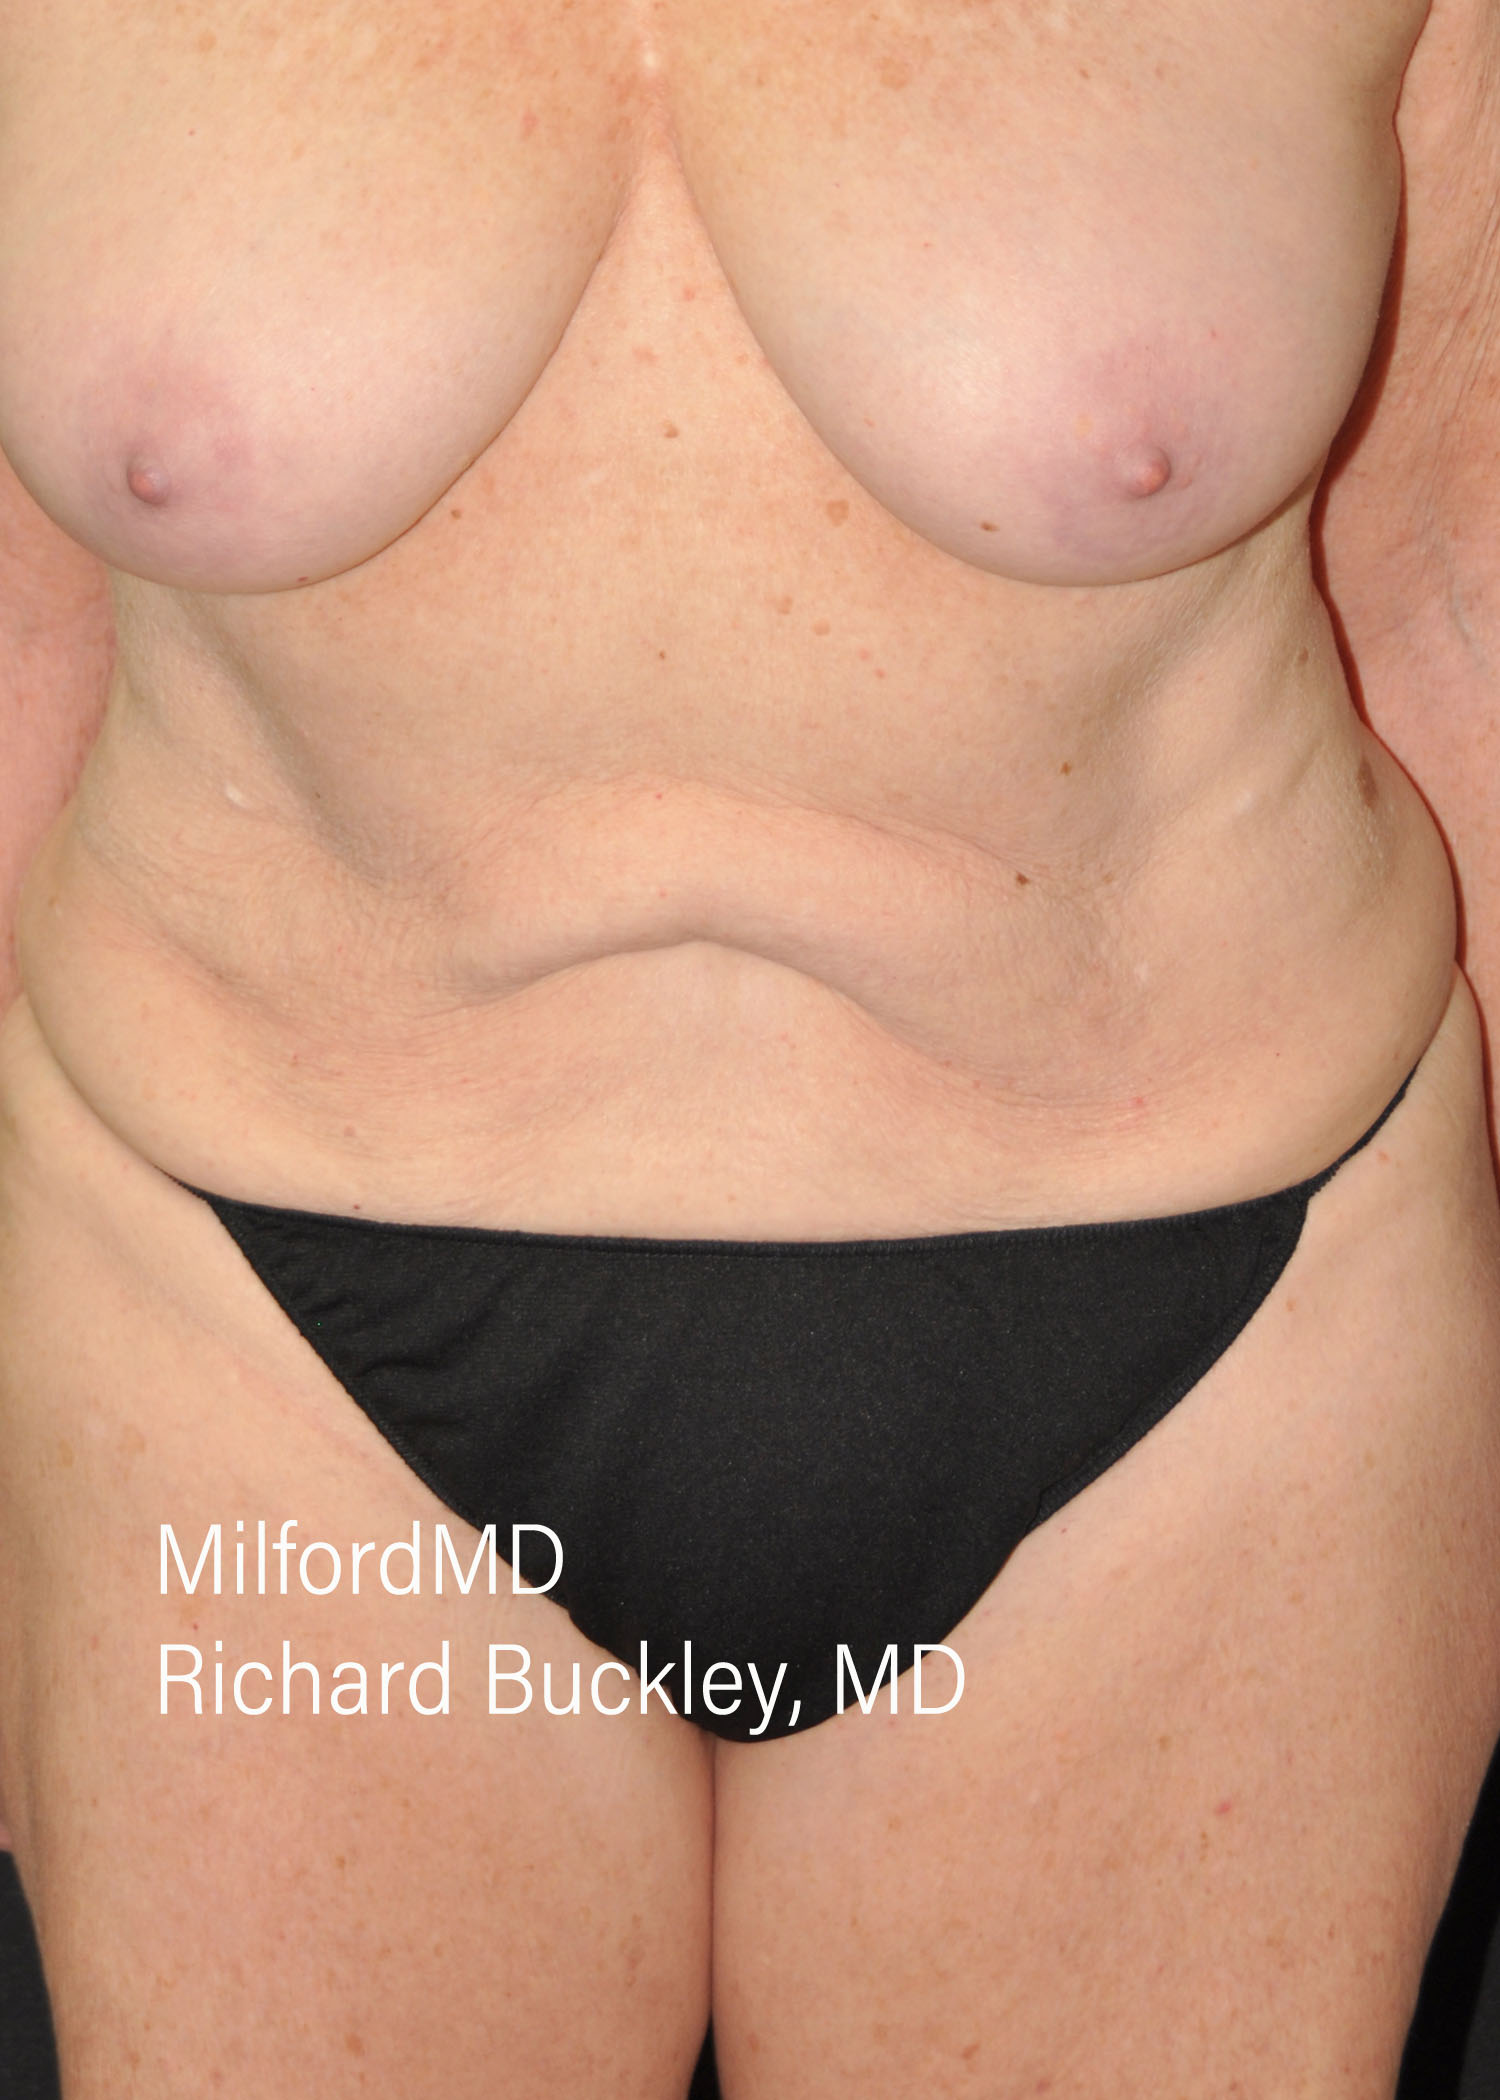 What is a reverse abdominoplasty and who needs it?